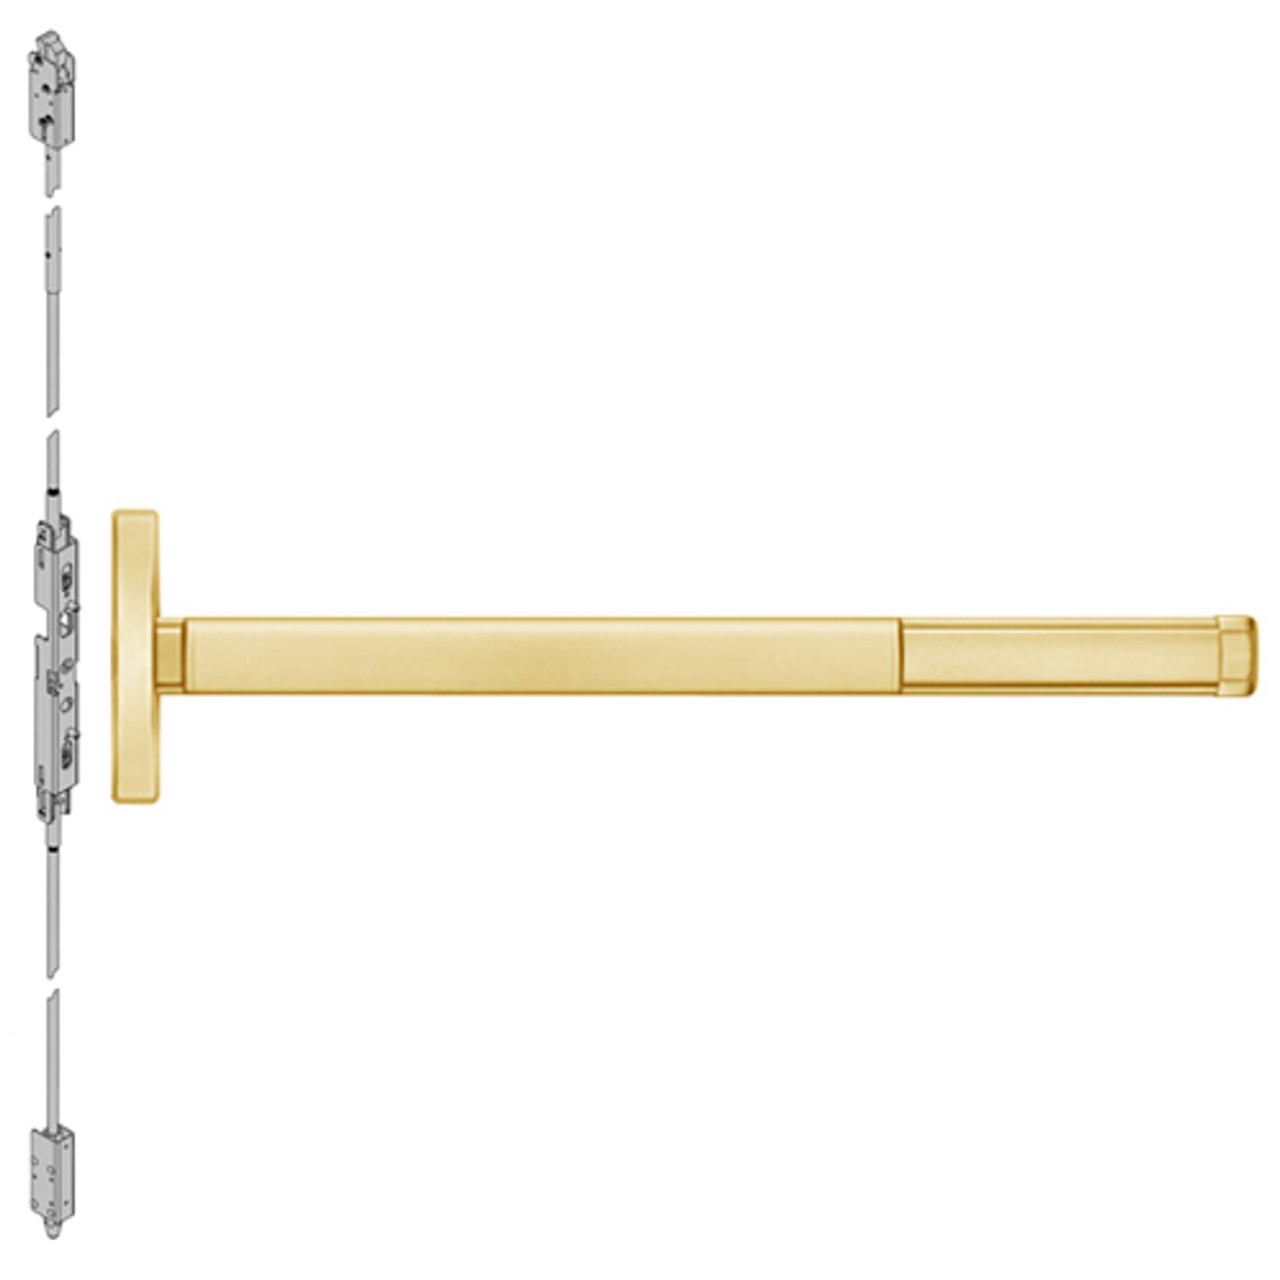 TS2614LBR-605-36 PHI 2600 Series Concealed Vertical Rod Exit Device with Touchbar Monitoring Switch Prepped for Lever Always Active in Bright Brass Finish